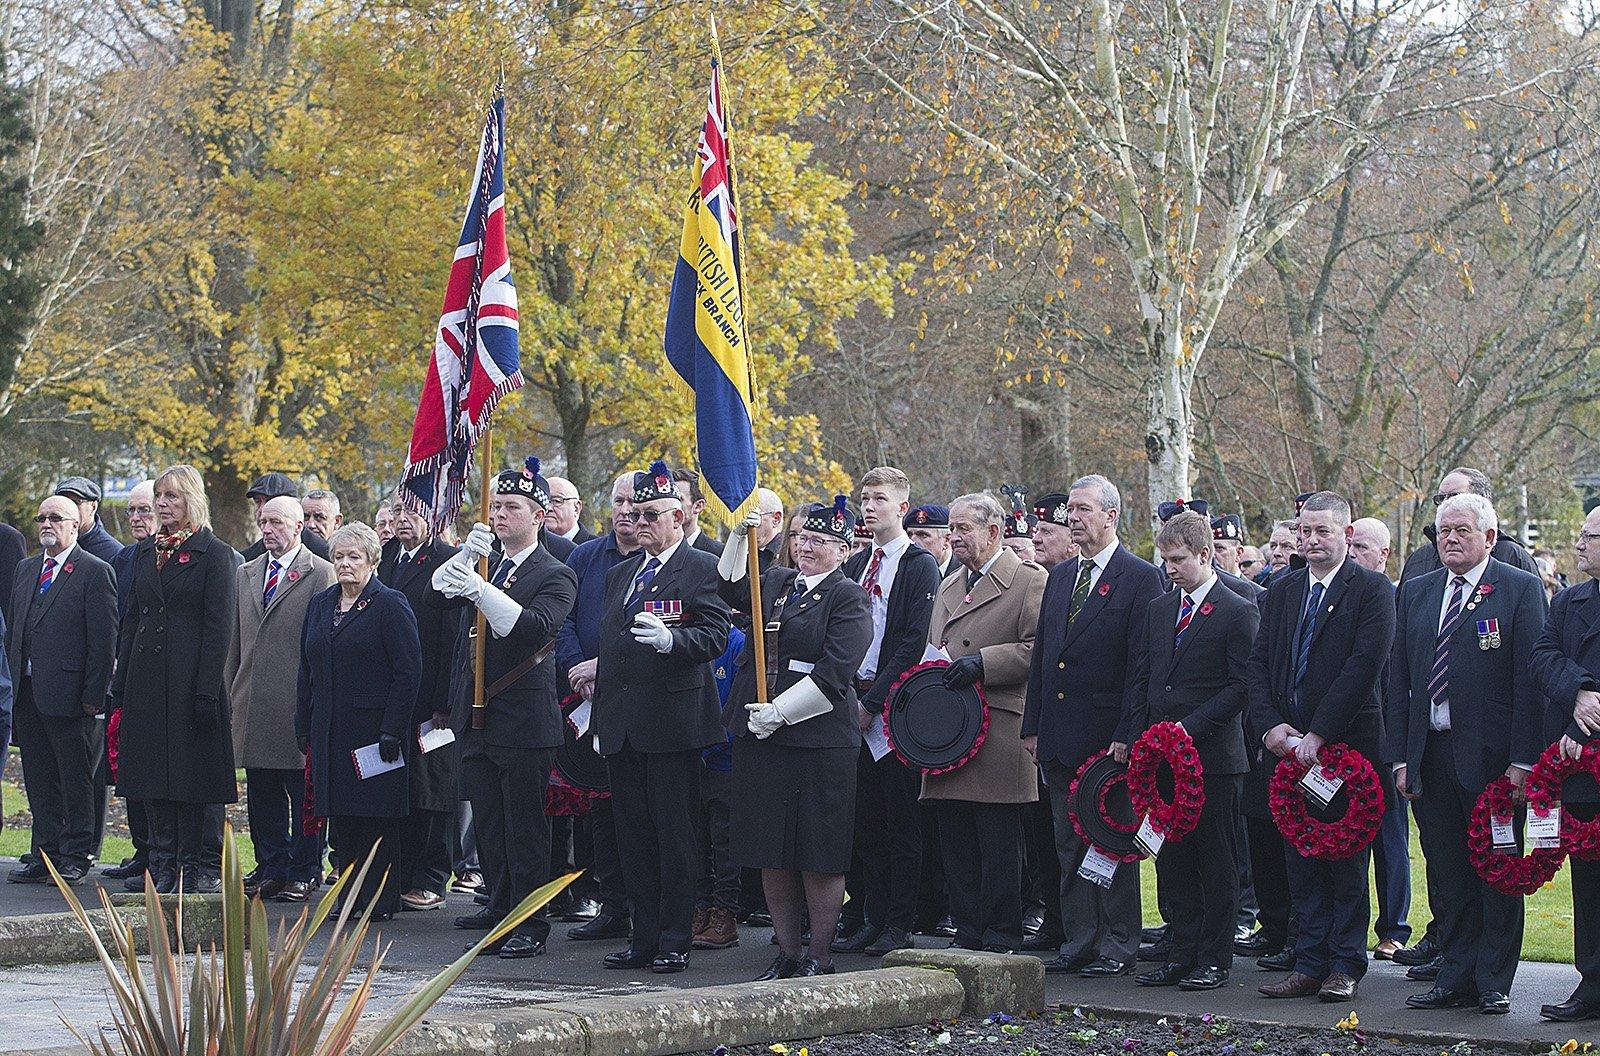 The act of remembrance in Hawick.